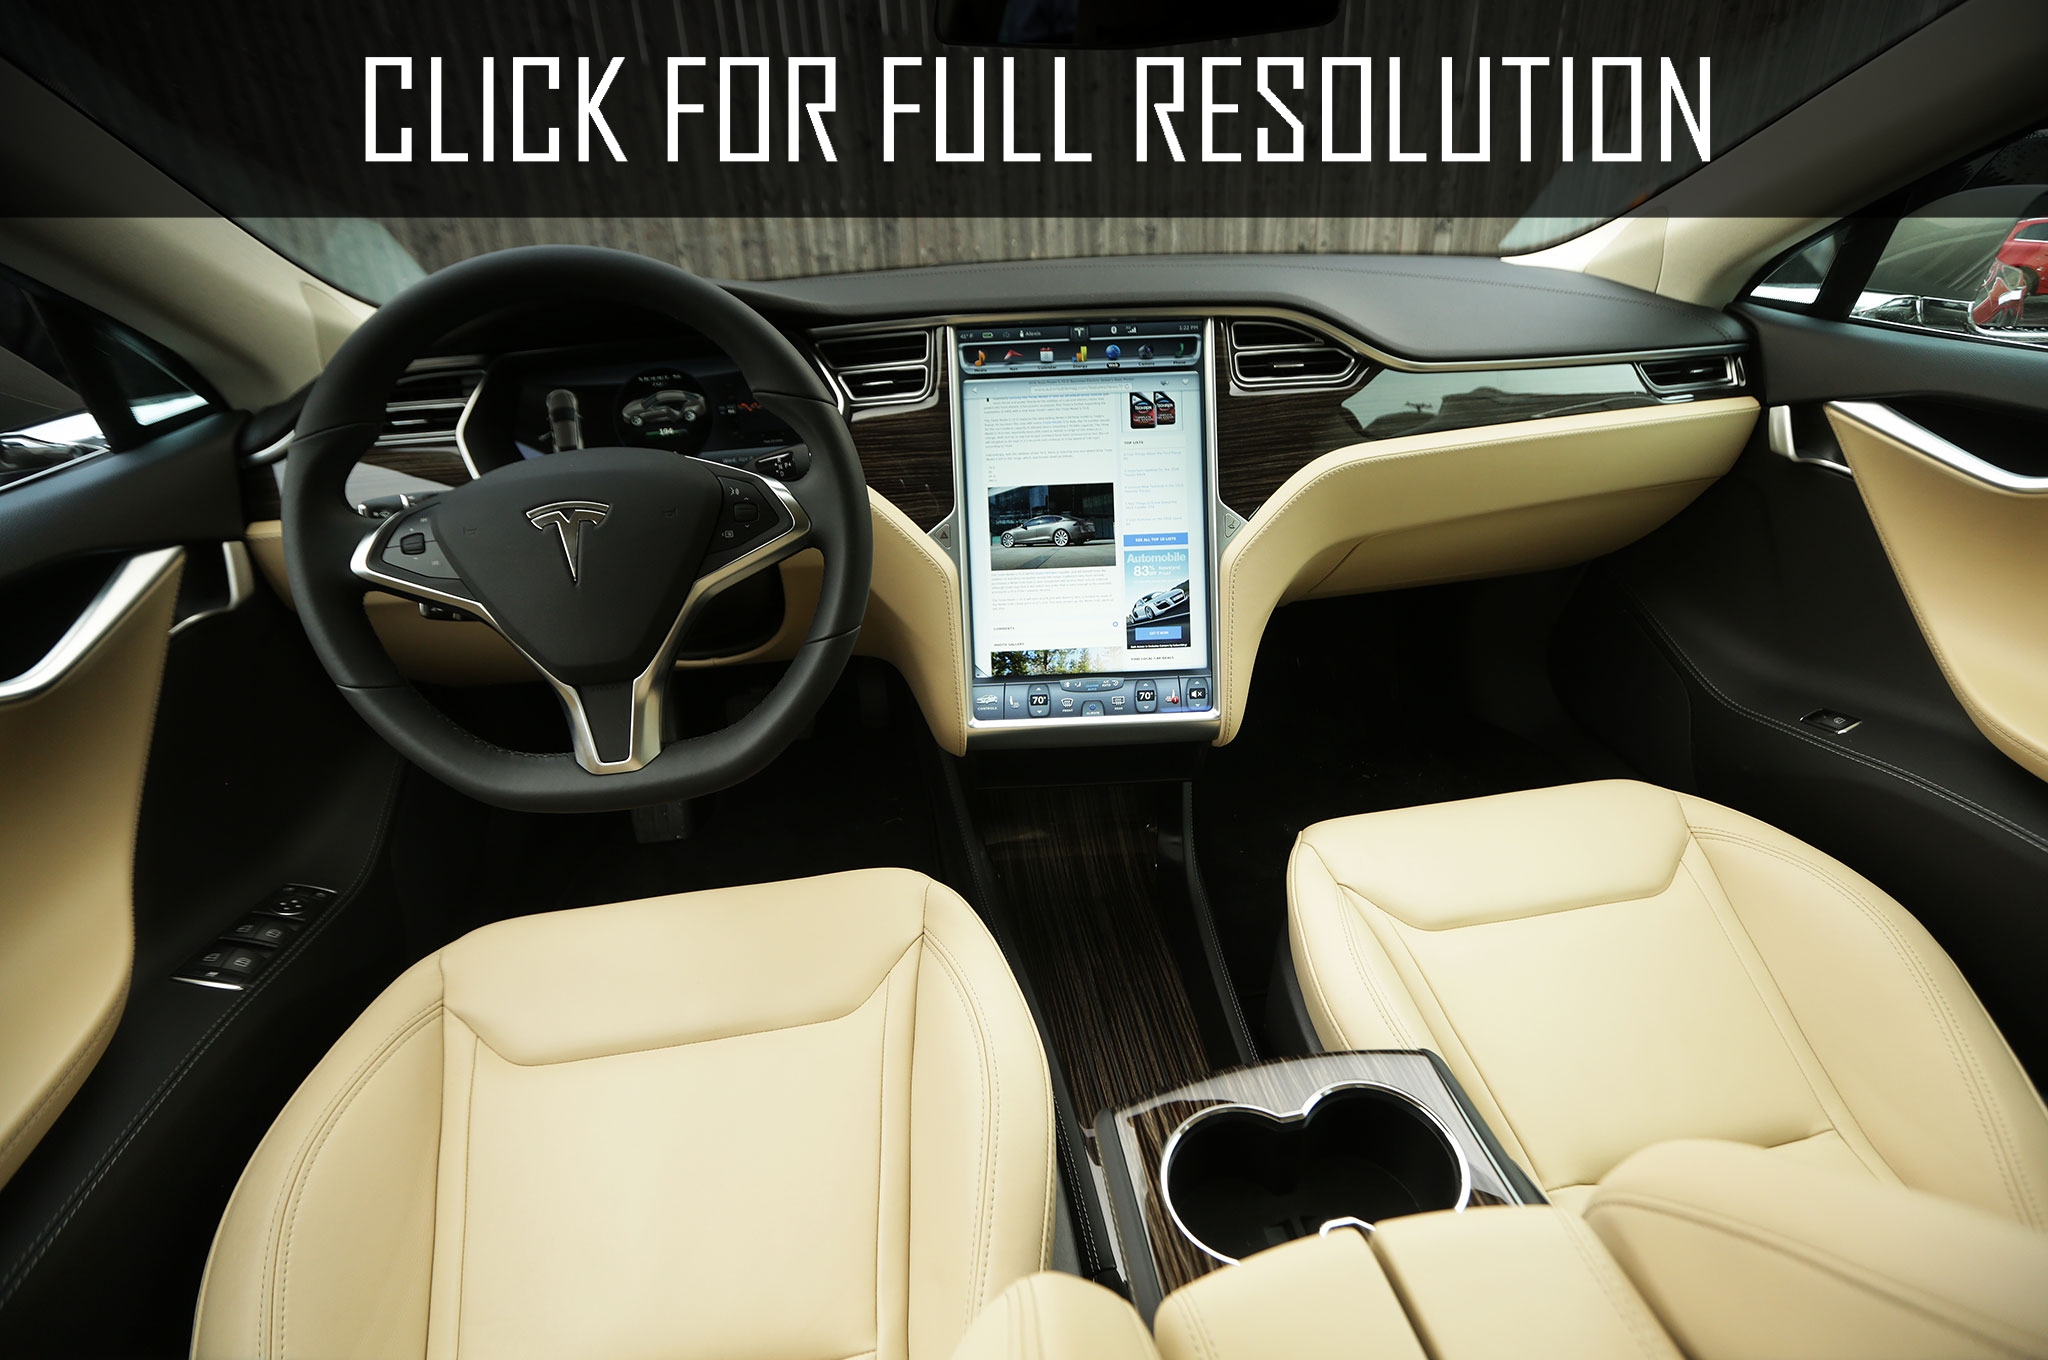 Tesla Model S 70d best image gallery #1/16 - share and download